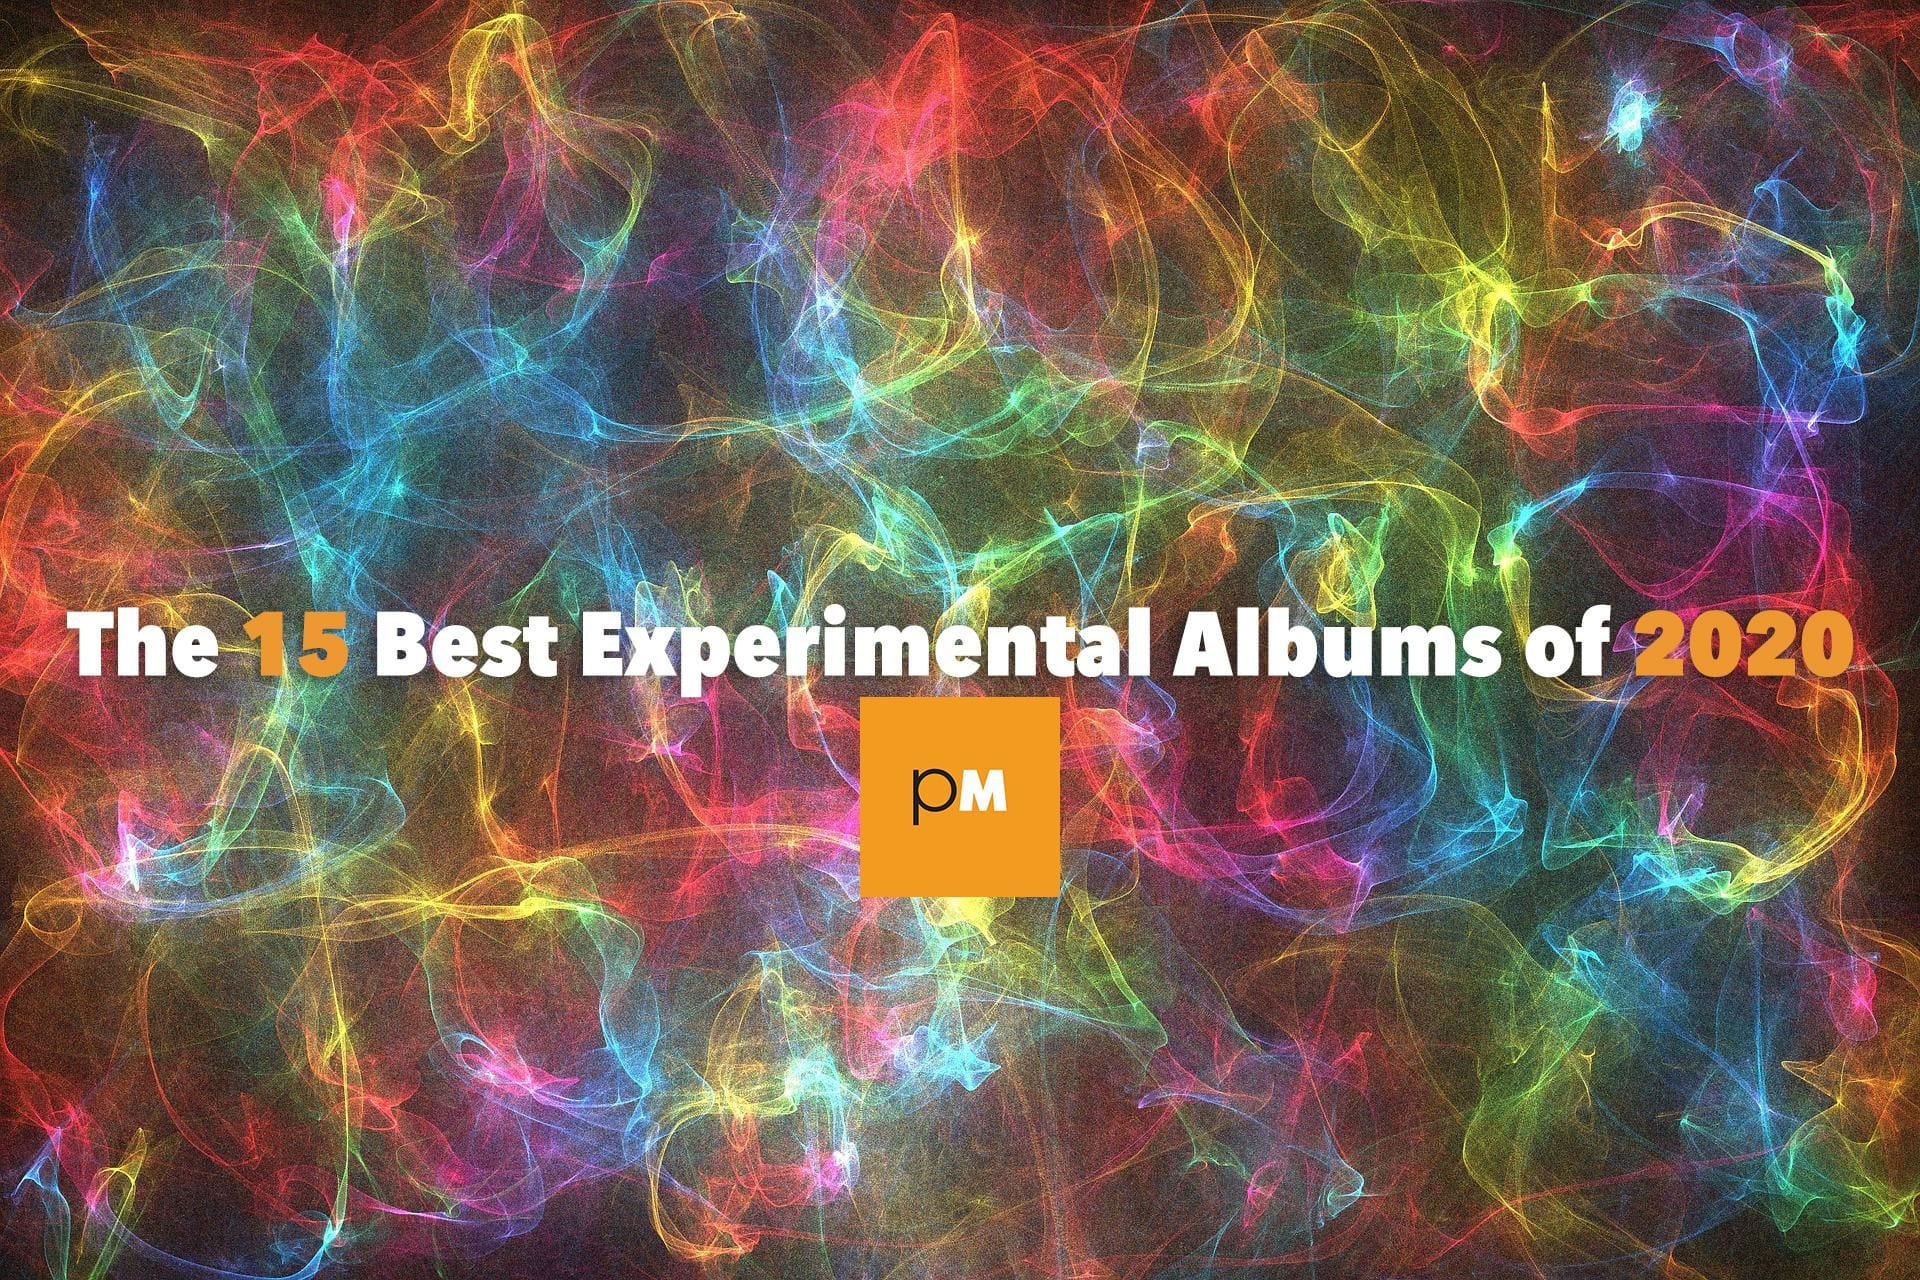 The 15 Best Experimental Albums of 2020